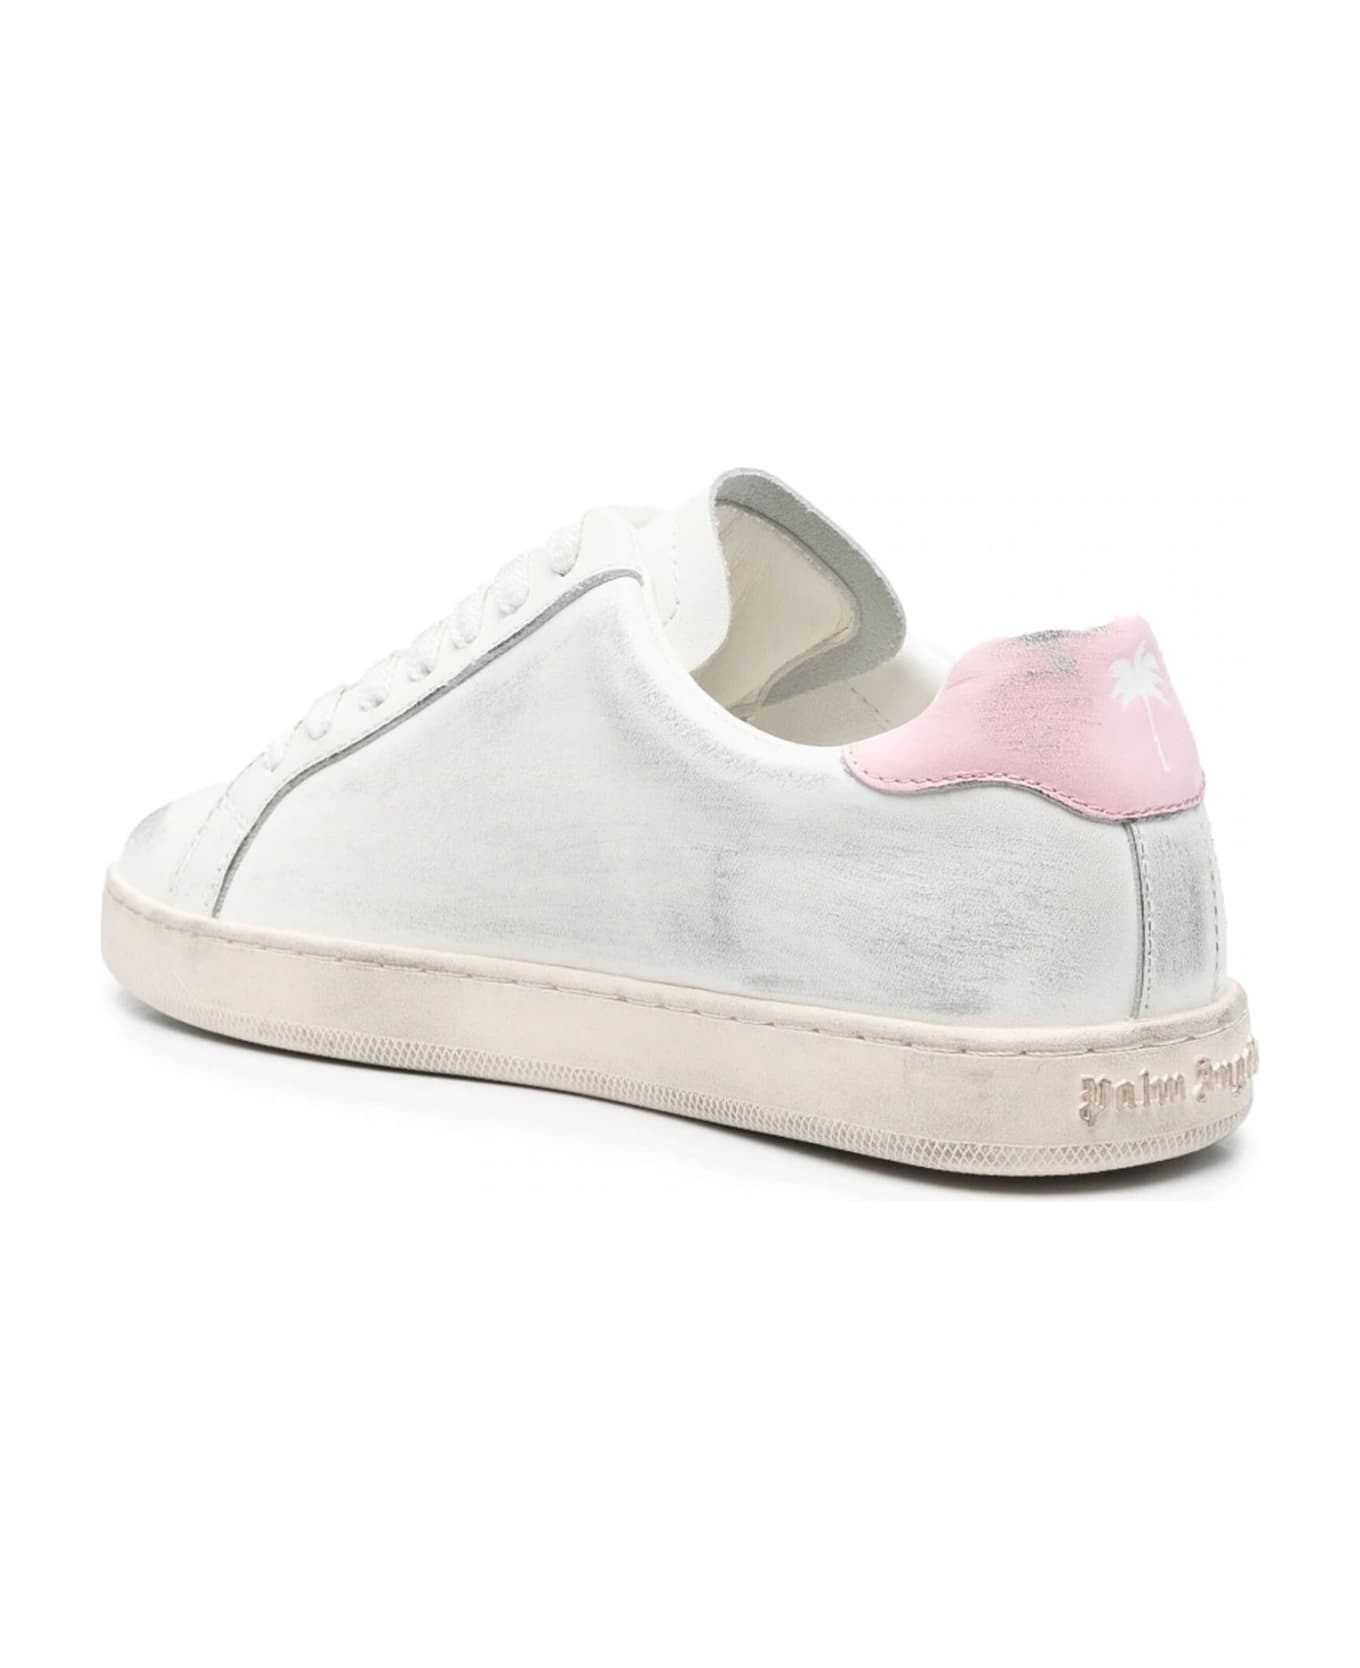 Palm Angels Logo Printed Distressed Lace-up Sneakers - Bianco+rosa